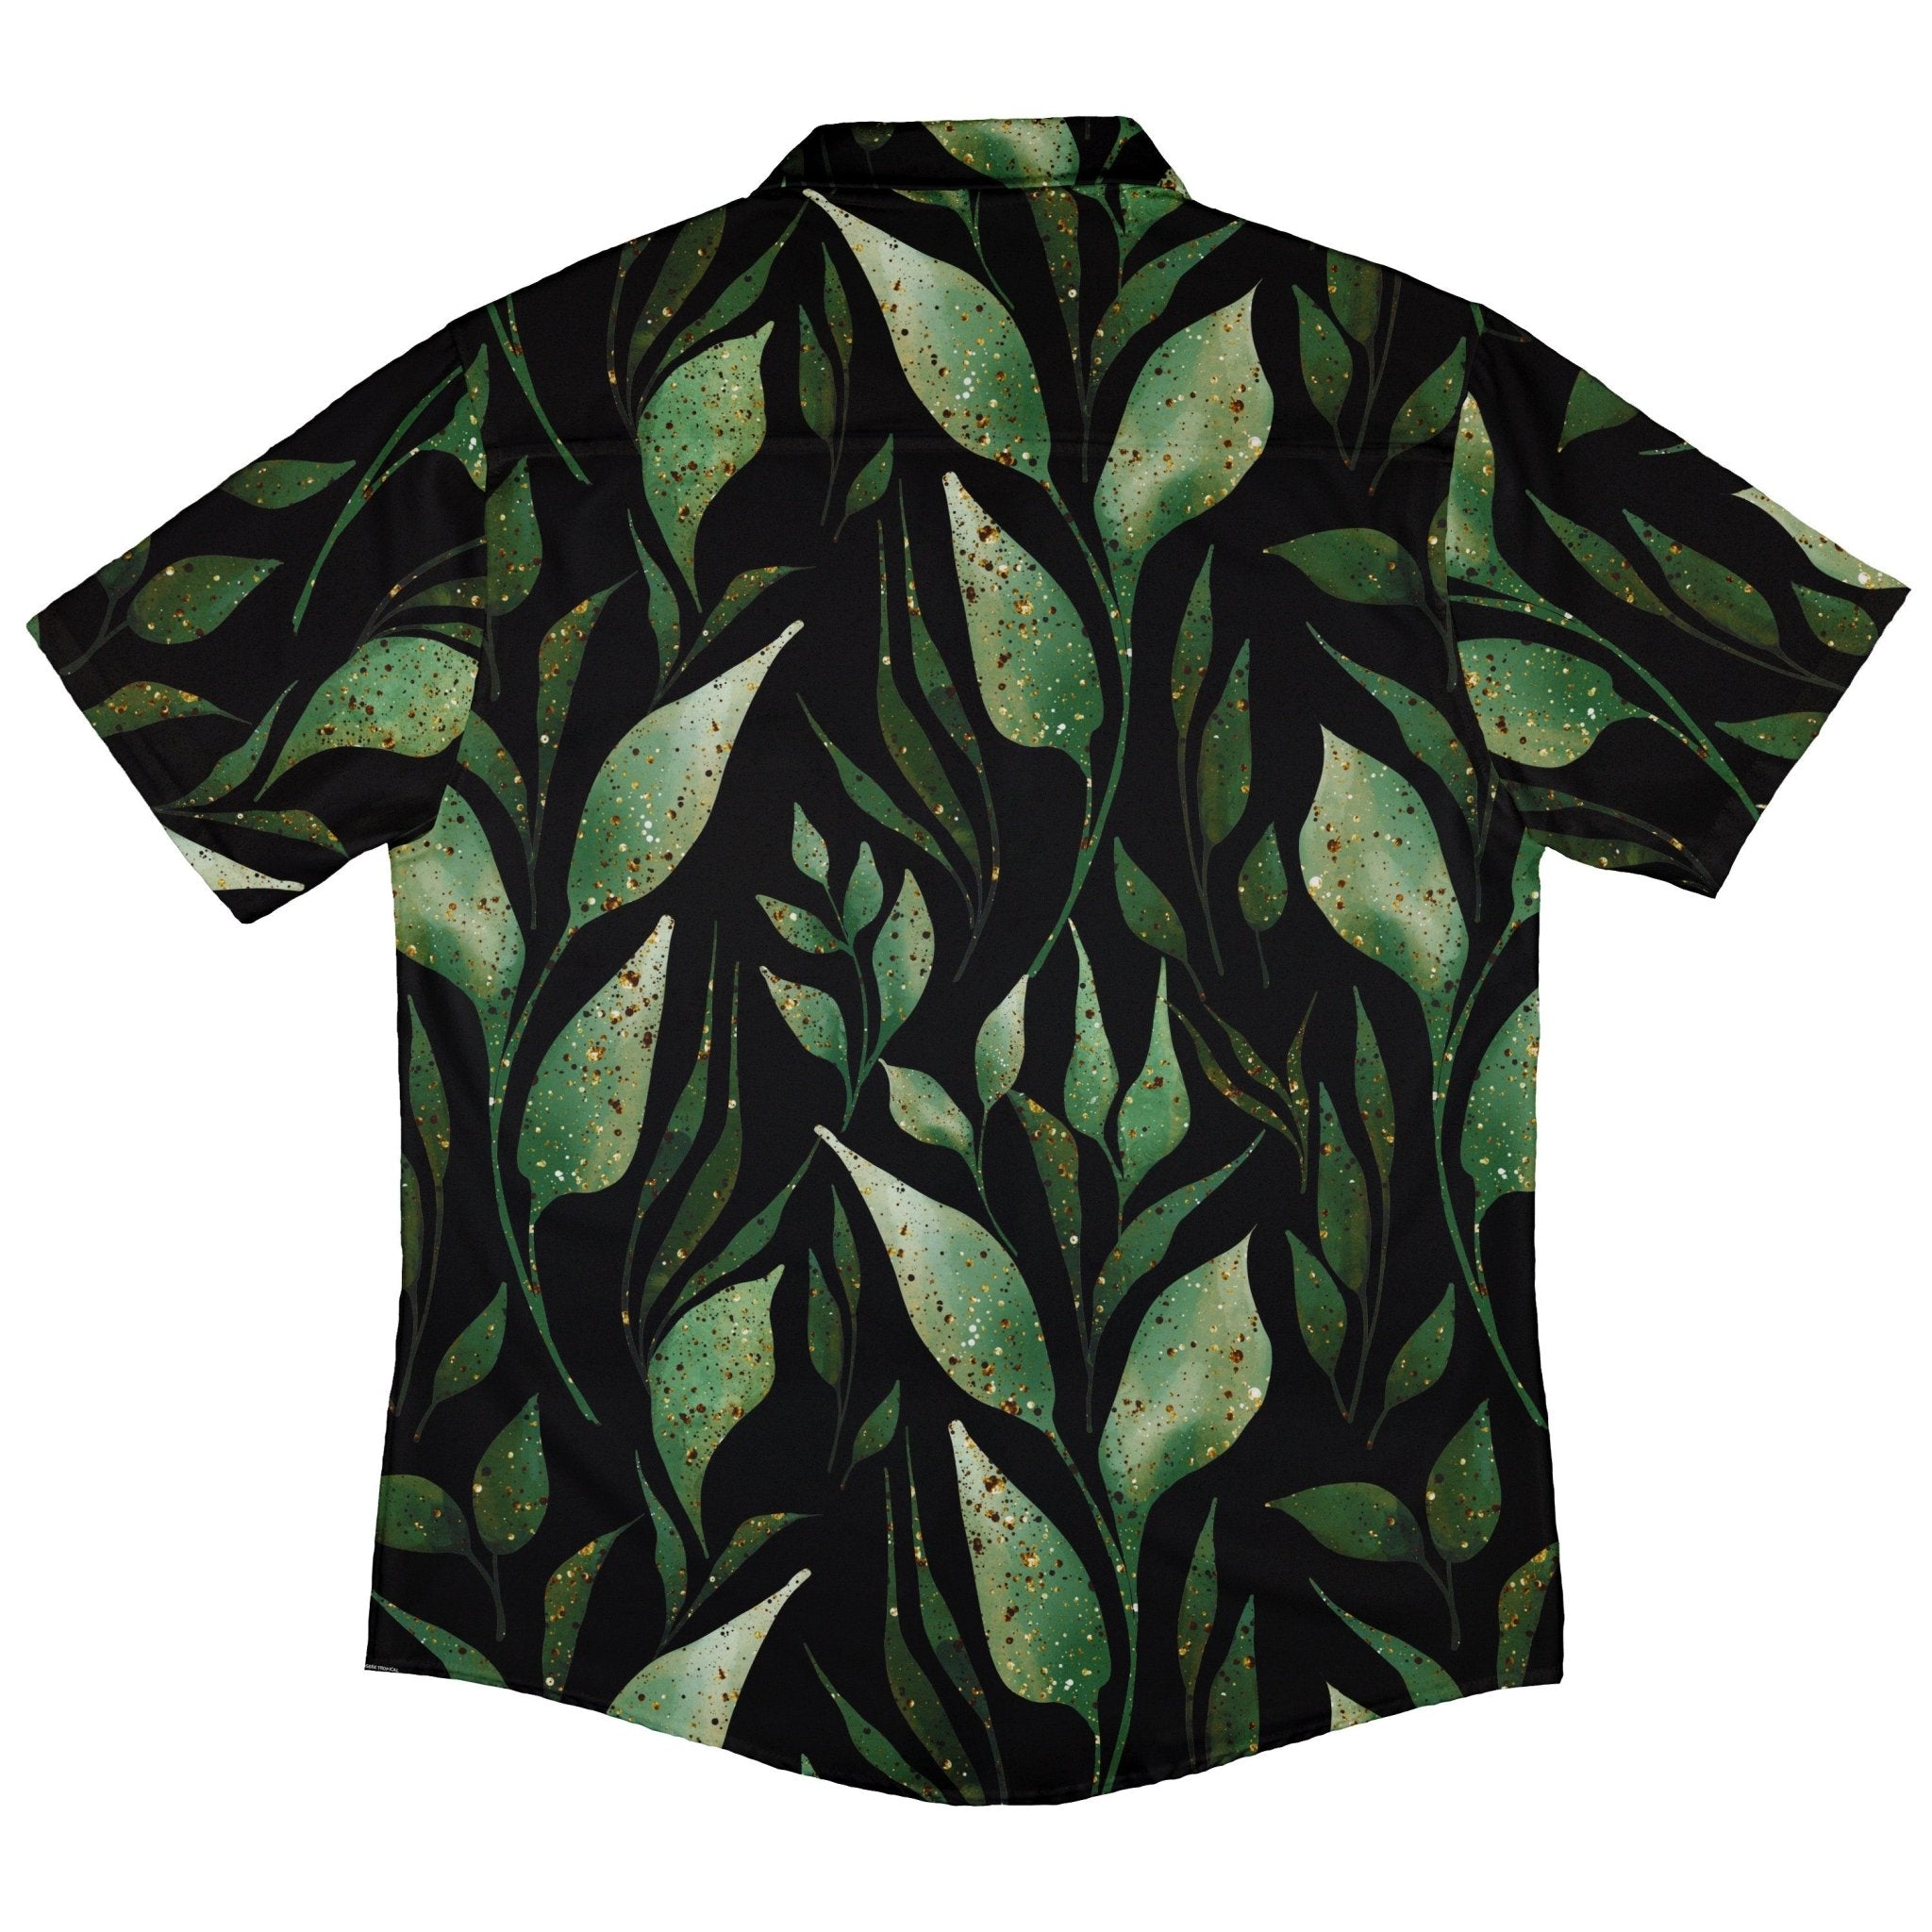 Growing Leaves Metallic Specs Button Up Shirt - adult sizing - Botany Print - Simple Patterns